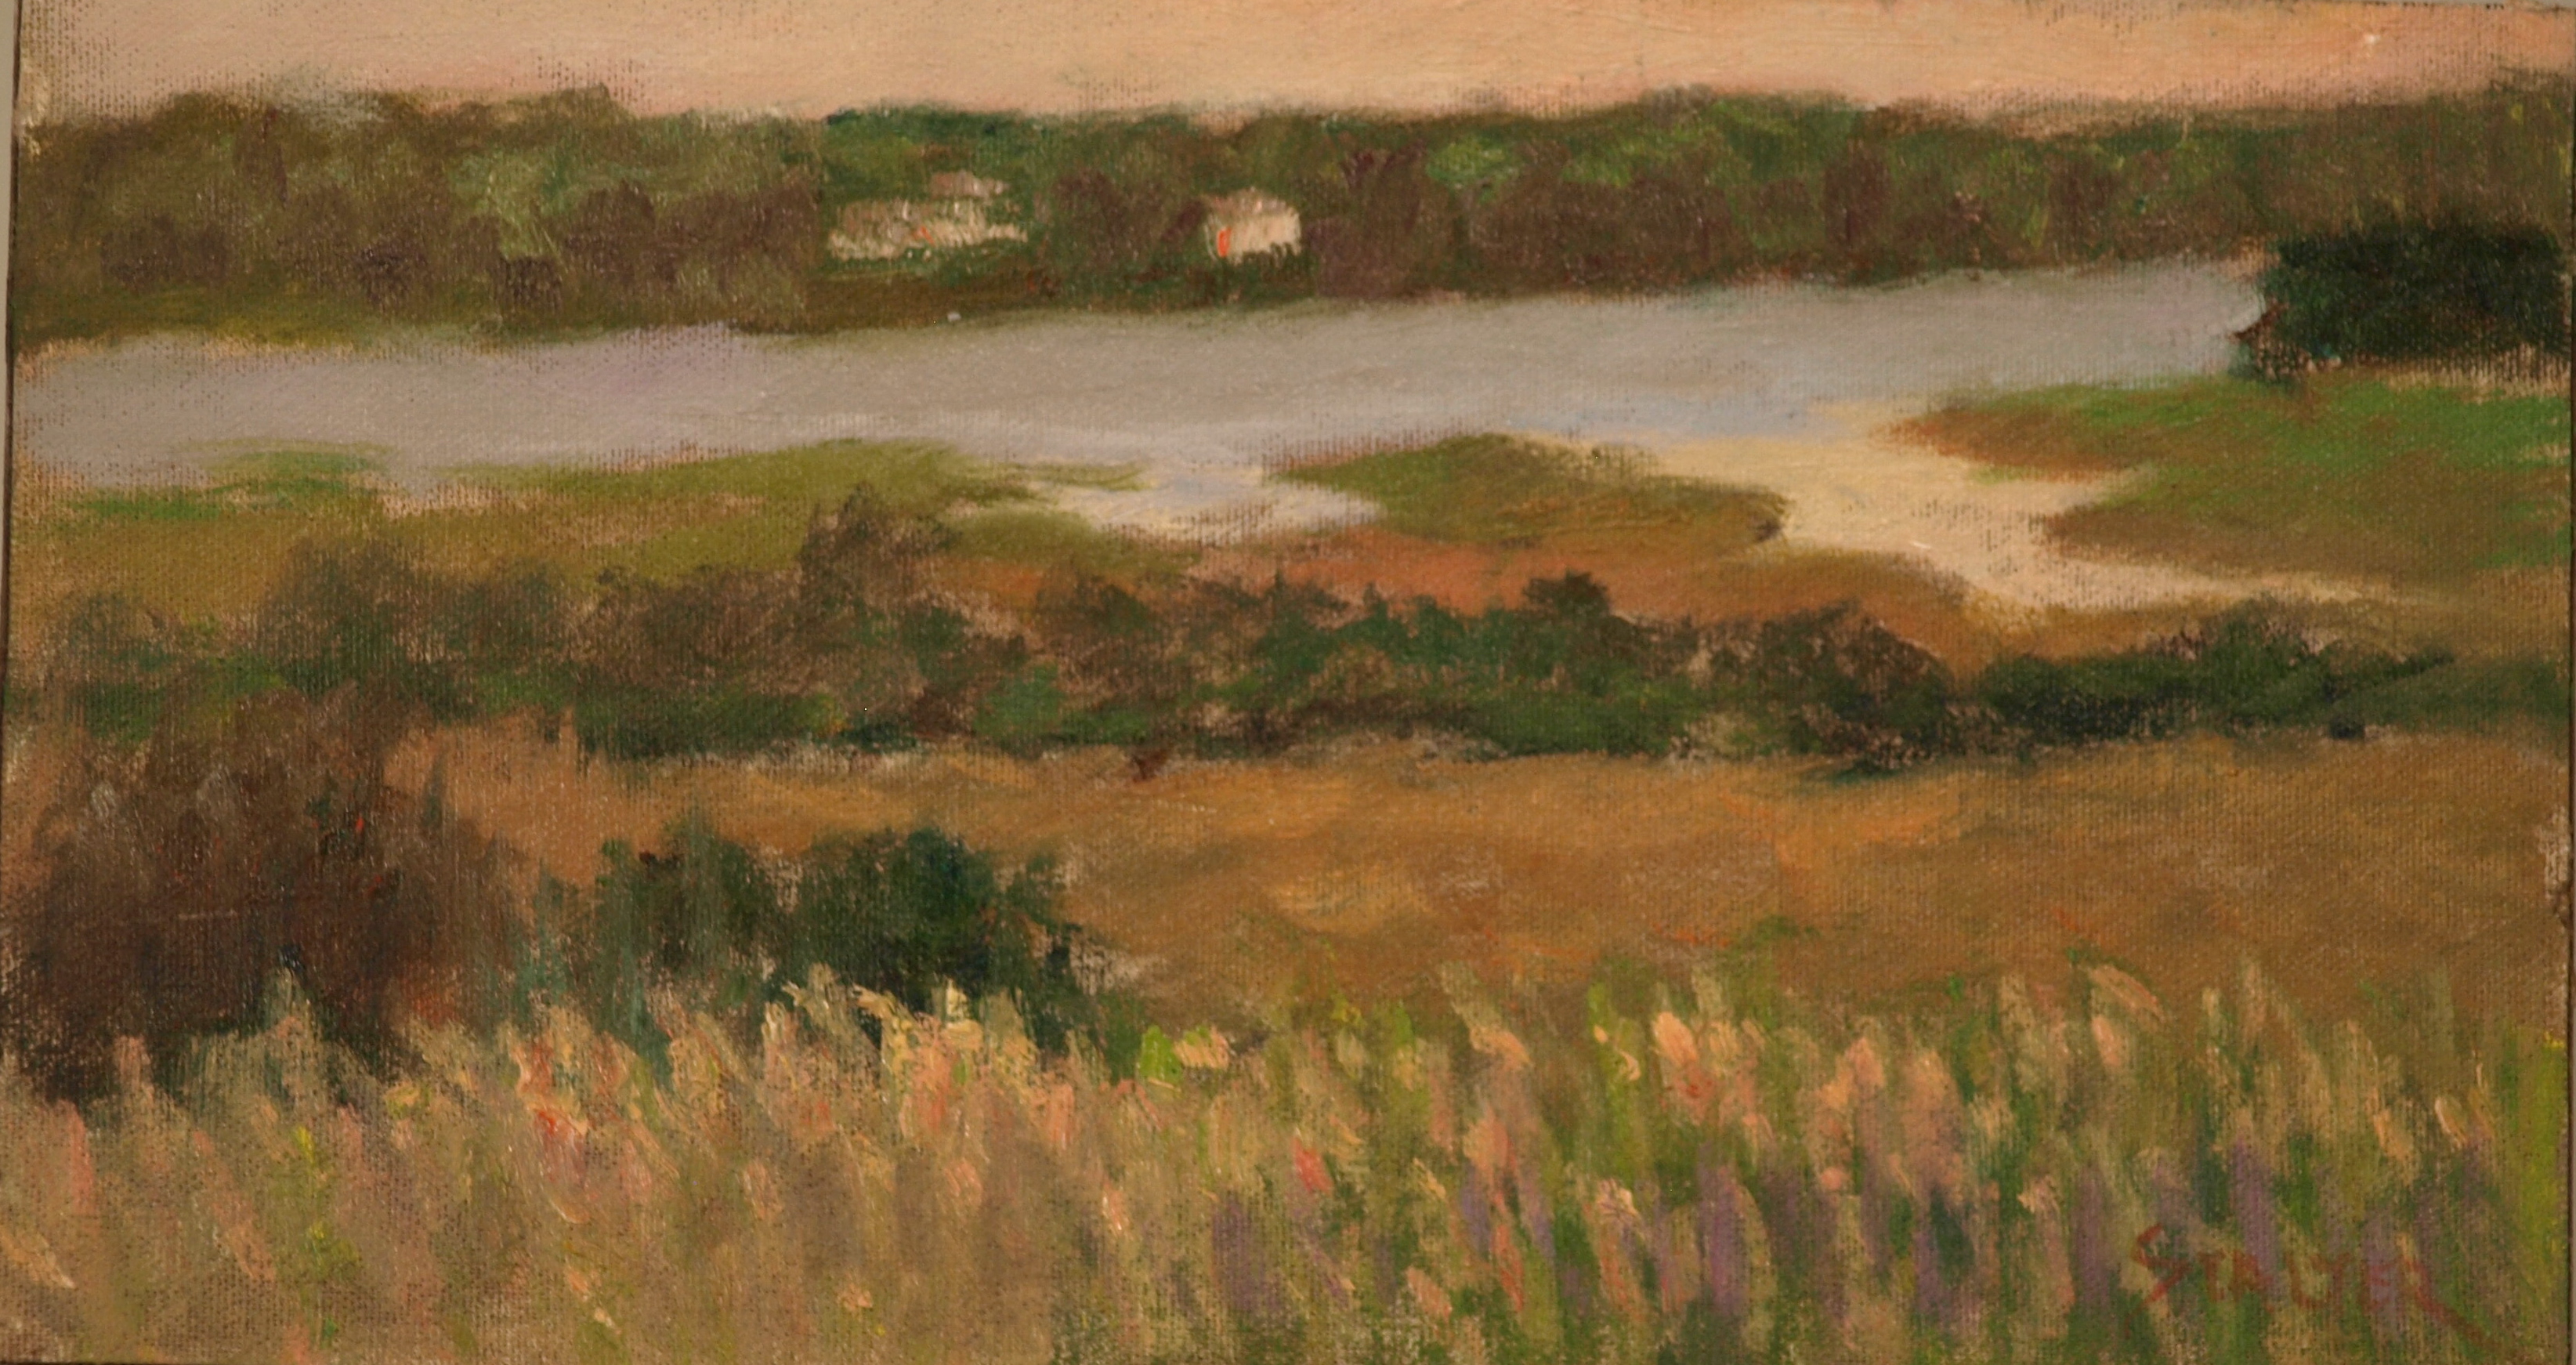 River from Fort Hill, Oil on Canvas on Panel, 8 x 14 Inches, by Richard Stalter, $225